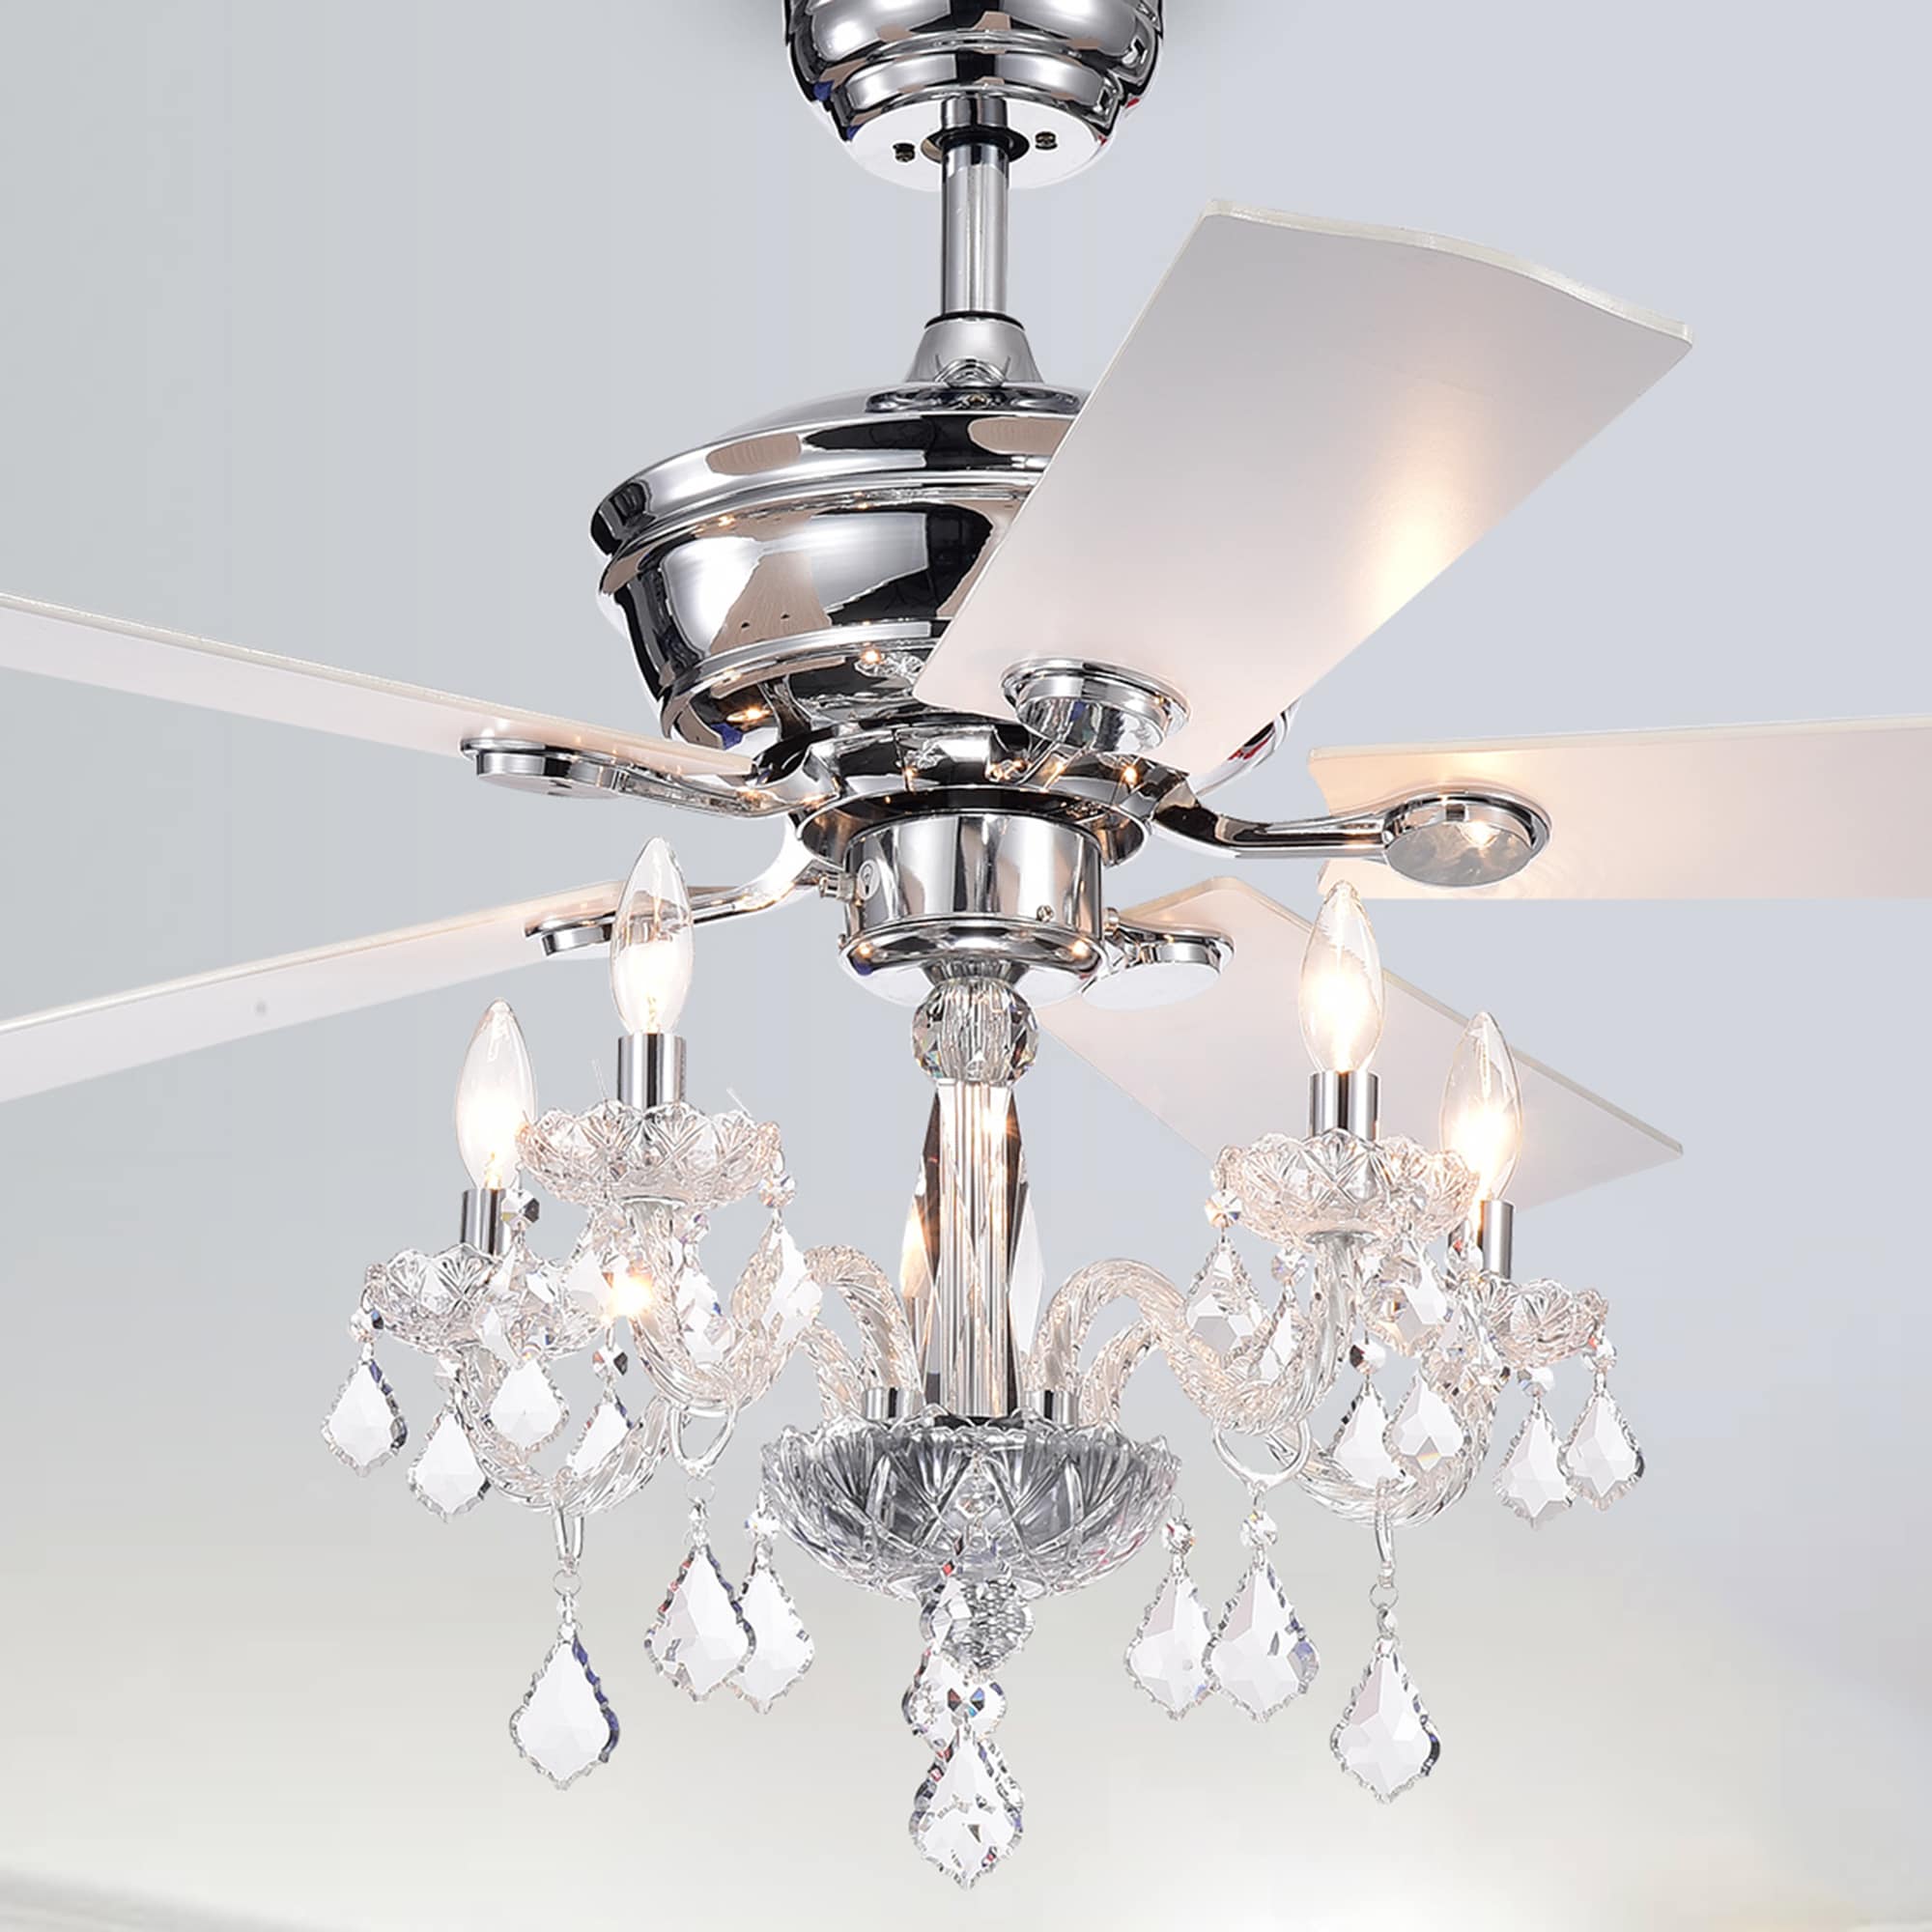 Rotere klassisk jeg er enig Home Accessories Inc 52-in Chrome Indoor Chandelier Ceiling Fan with Light  Remote (5-Blade) in the Ceiling Fans department at Lowes.com